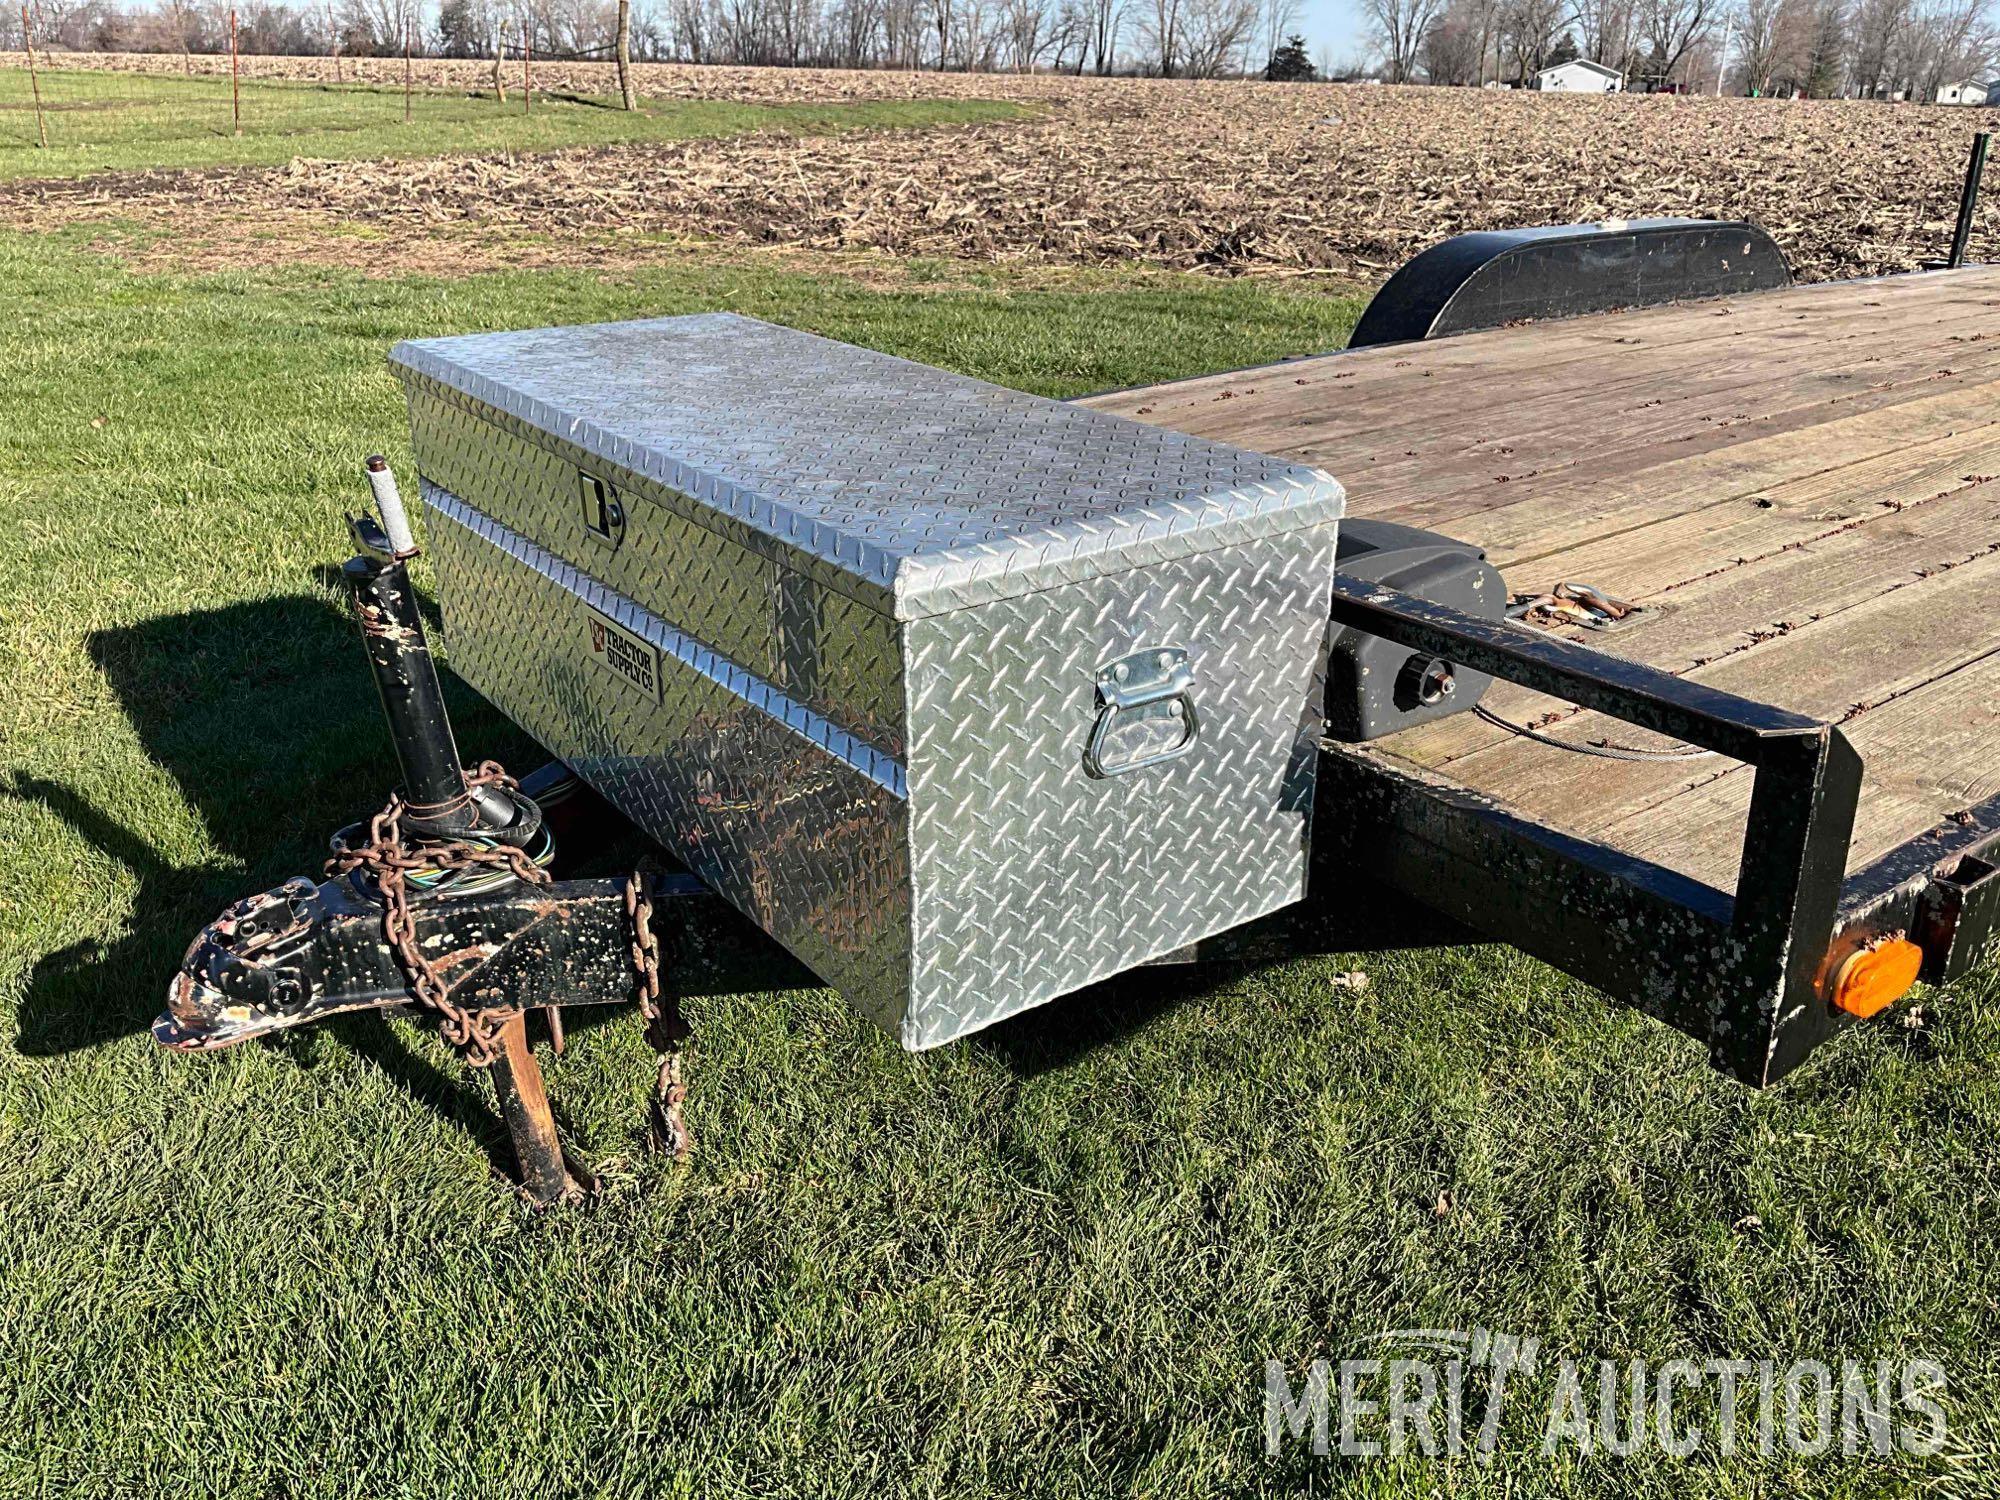 1992 7ft. x 16ft. flat bed trailer